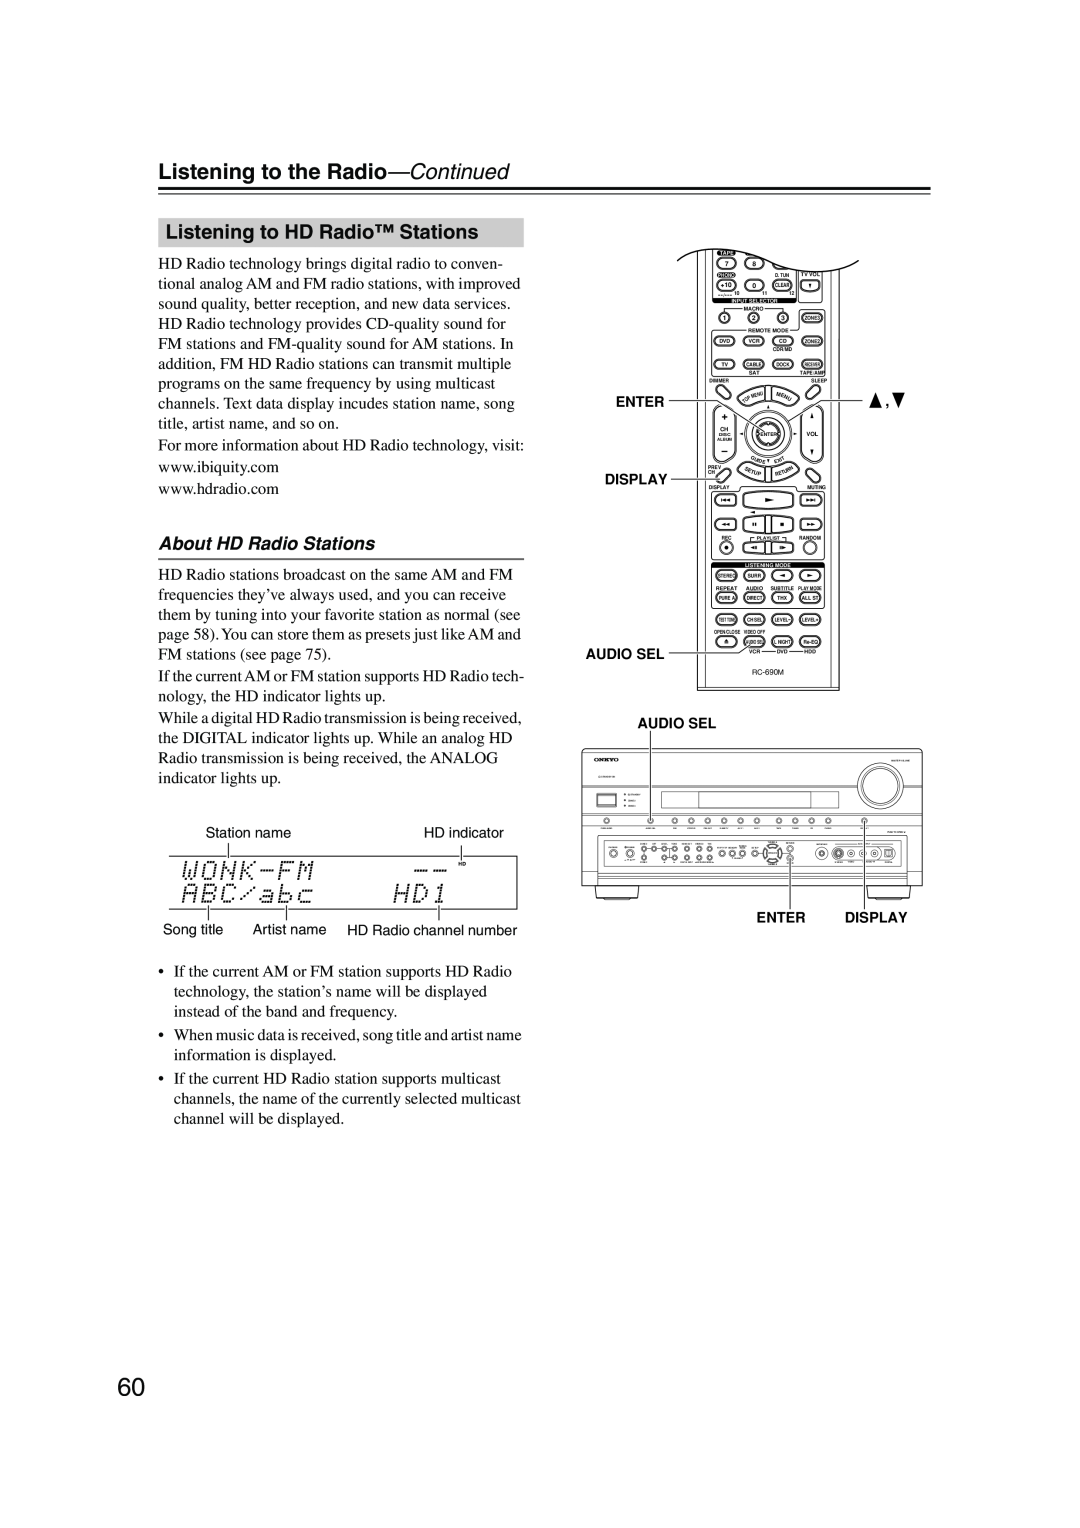 Onkyo PR-SC885 instruction manual Listening to HD Radio Stations, About HD Radio Stations, Listening to the Radio—Continued 